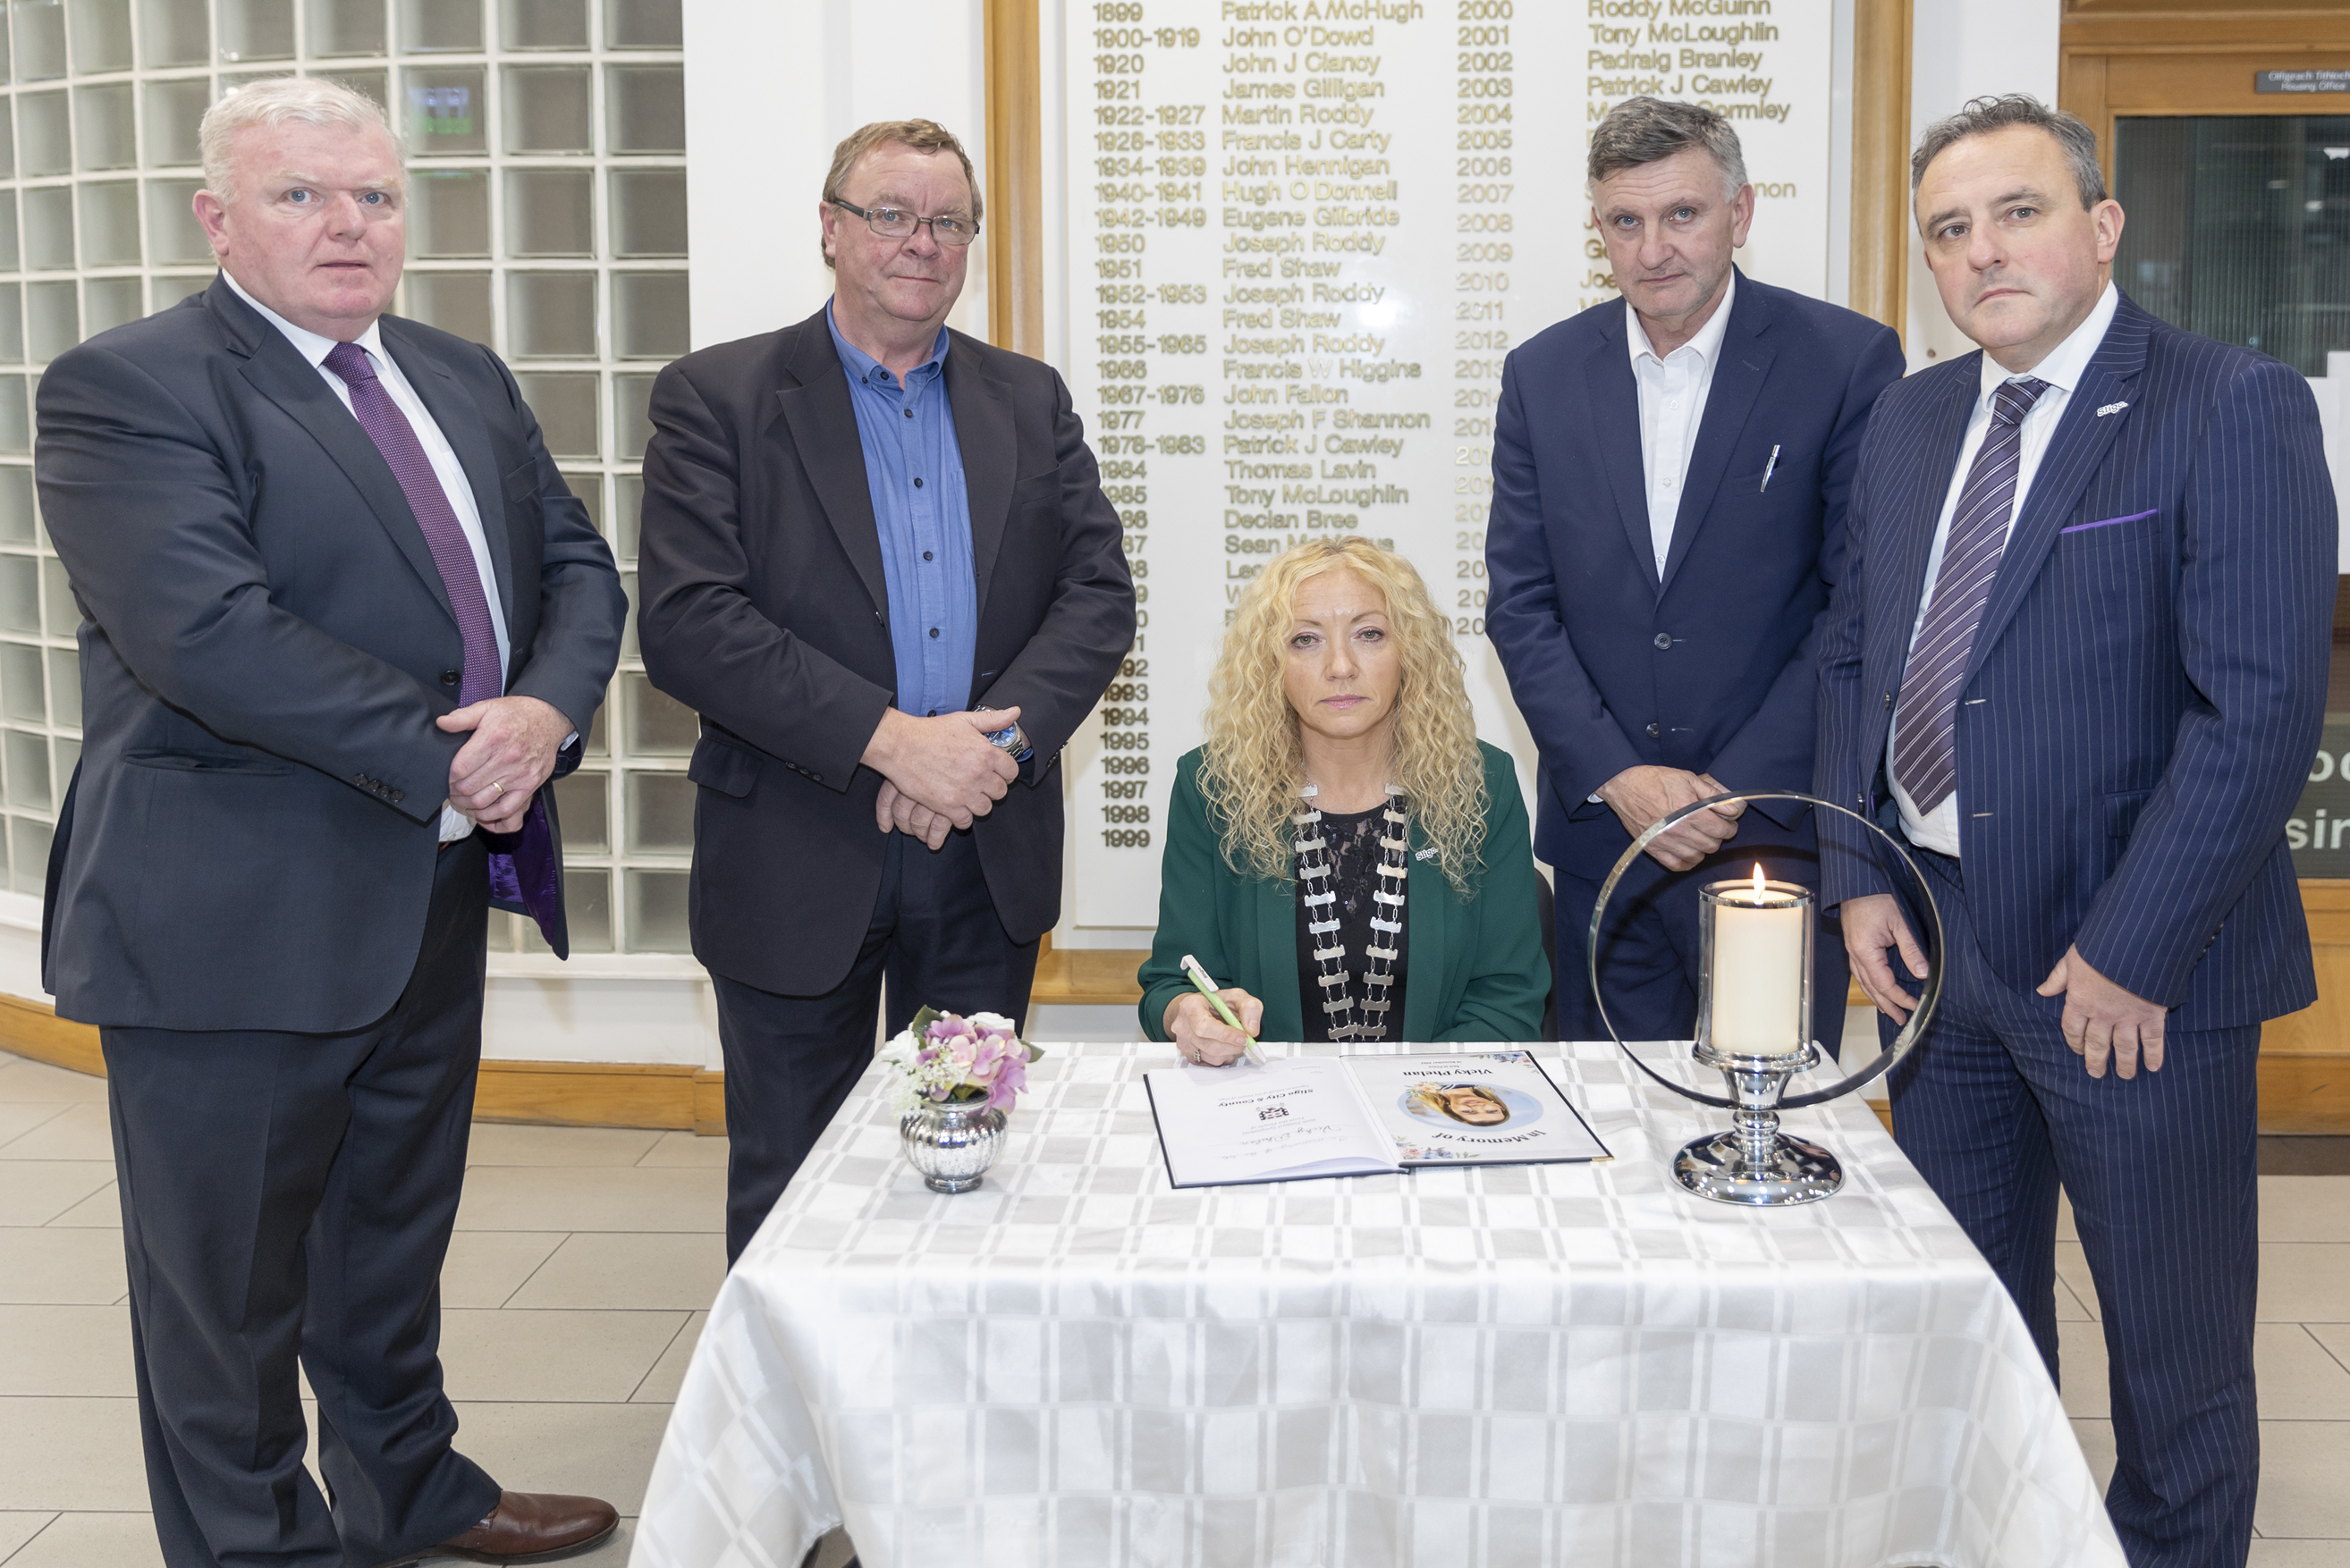 Book of Condolence Opened in Memory of Vicky Phelan